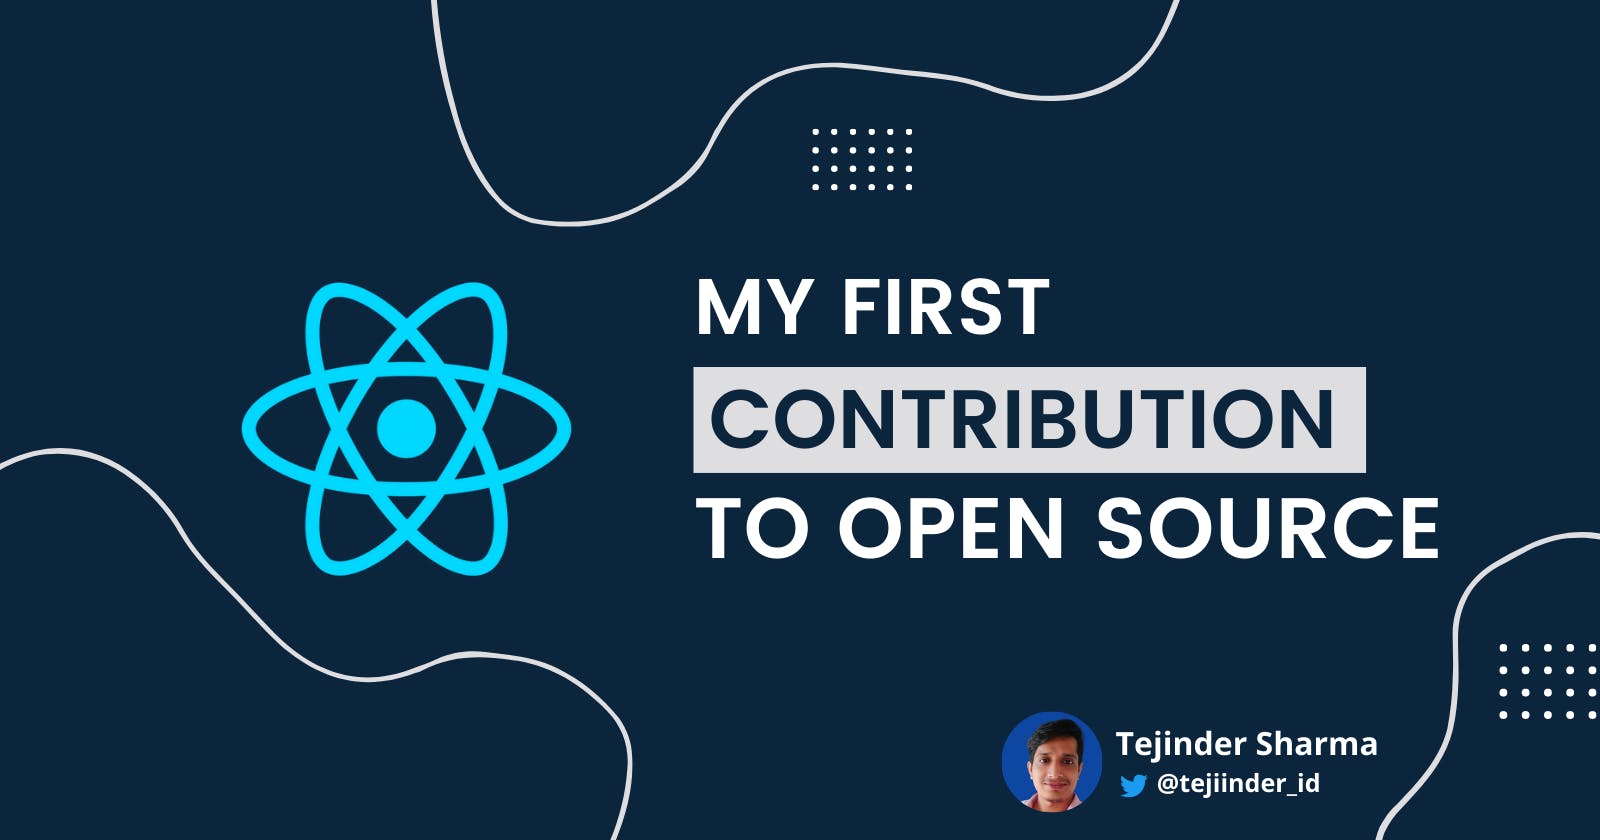 My First Contribution to Open Source.